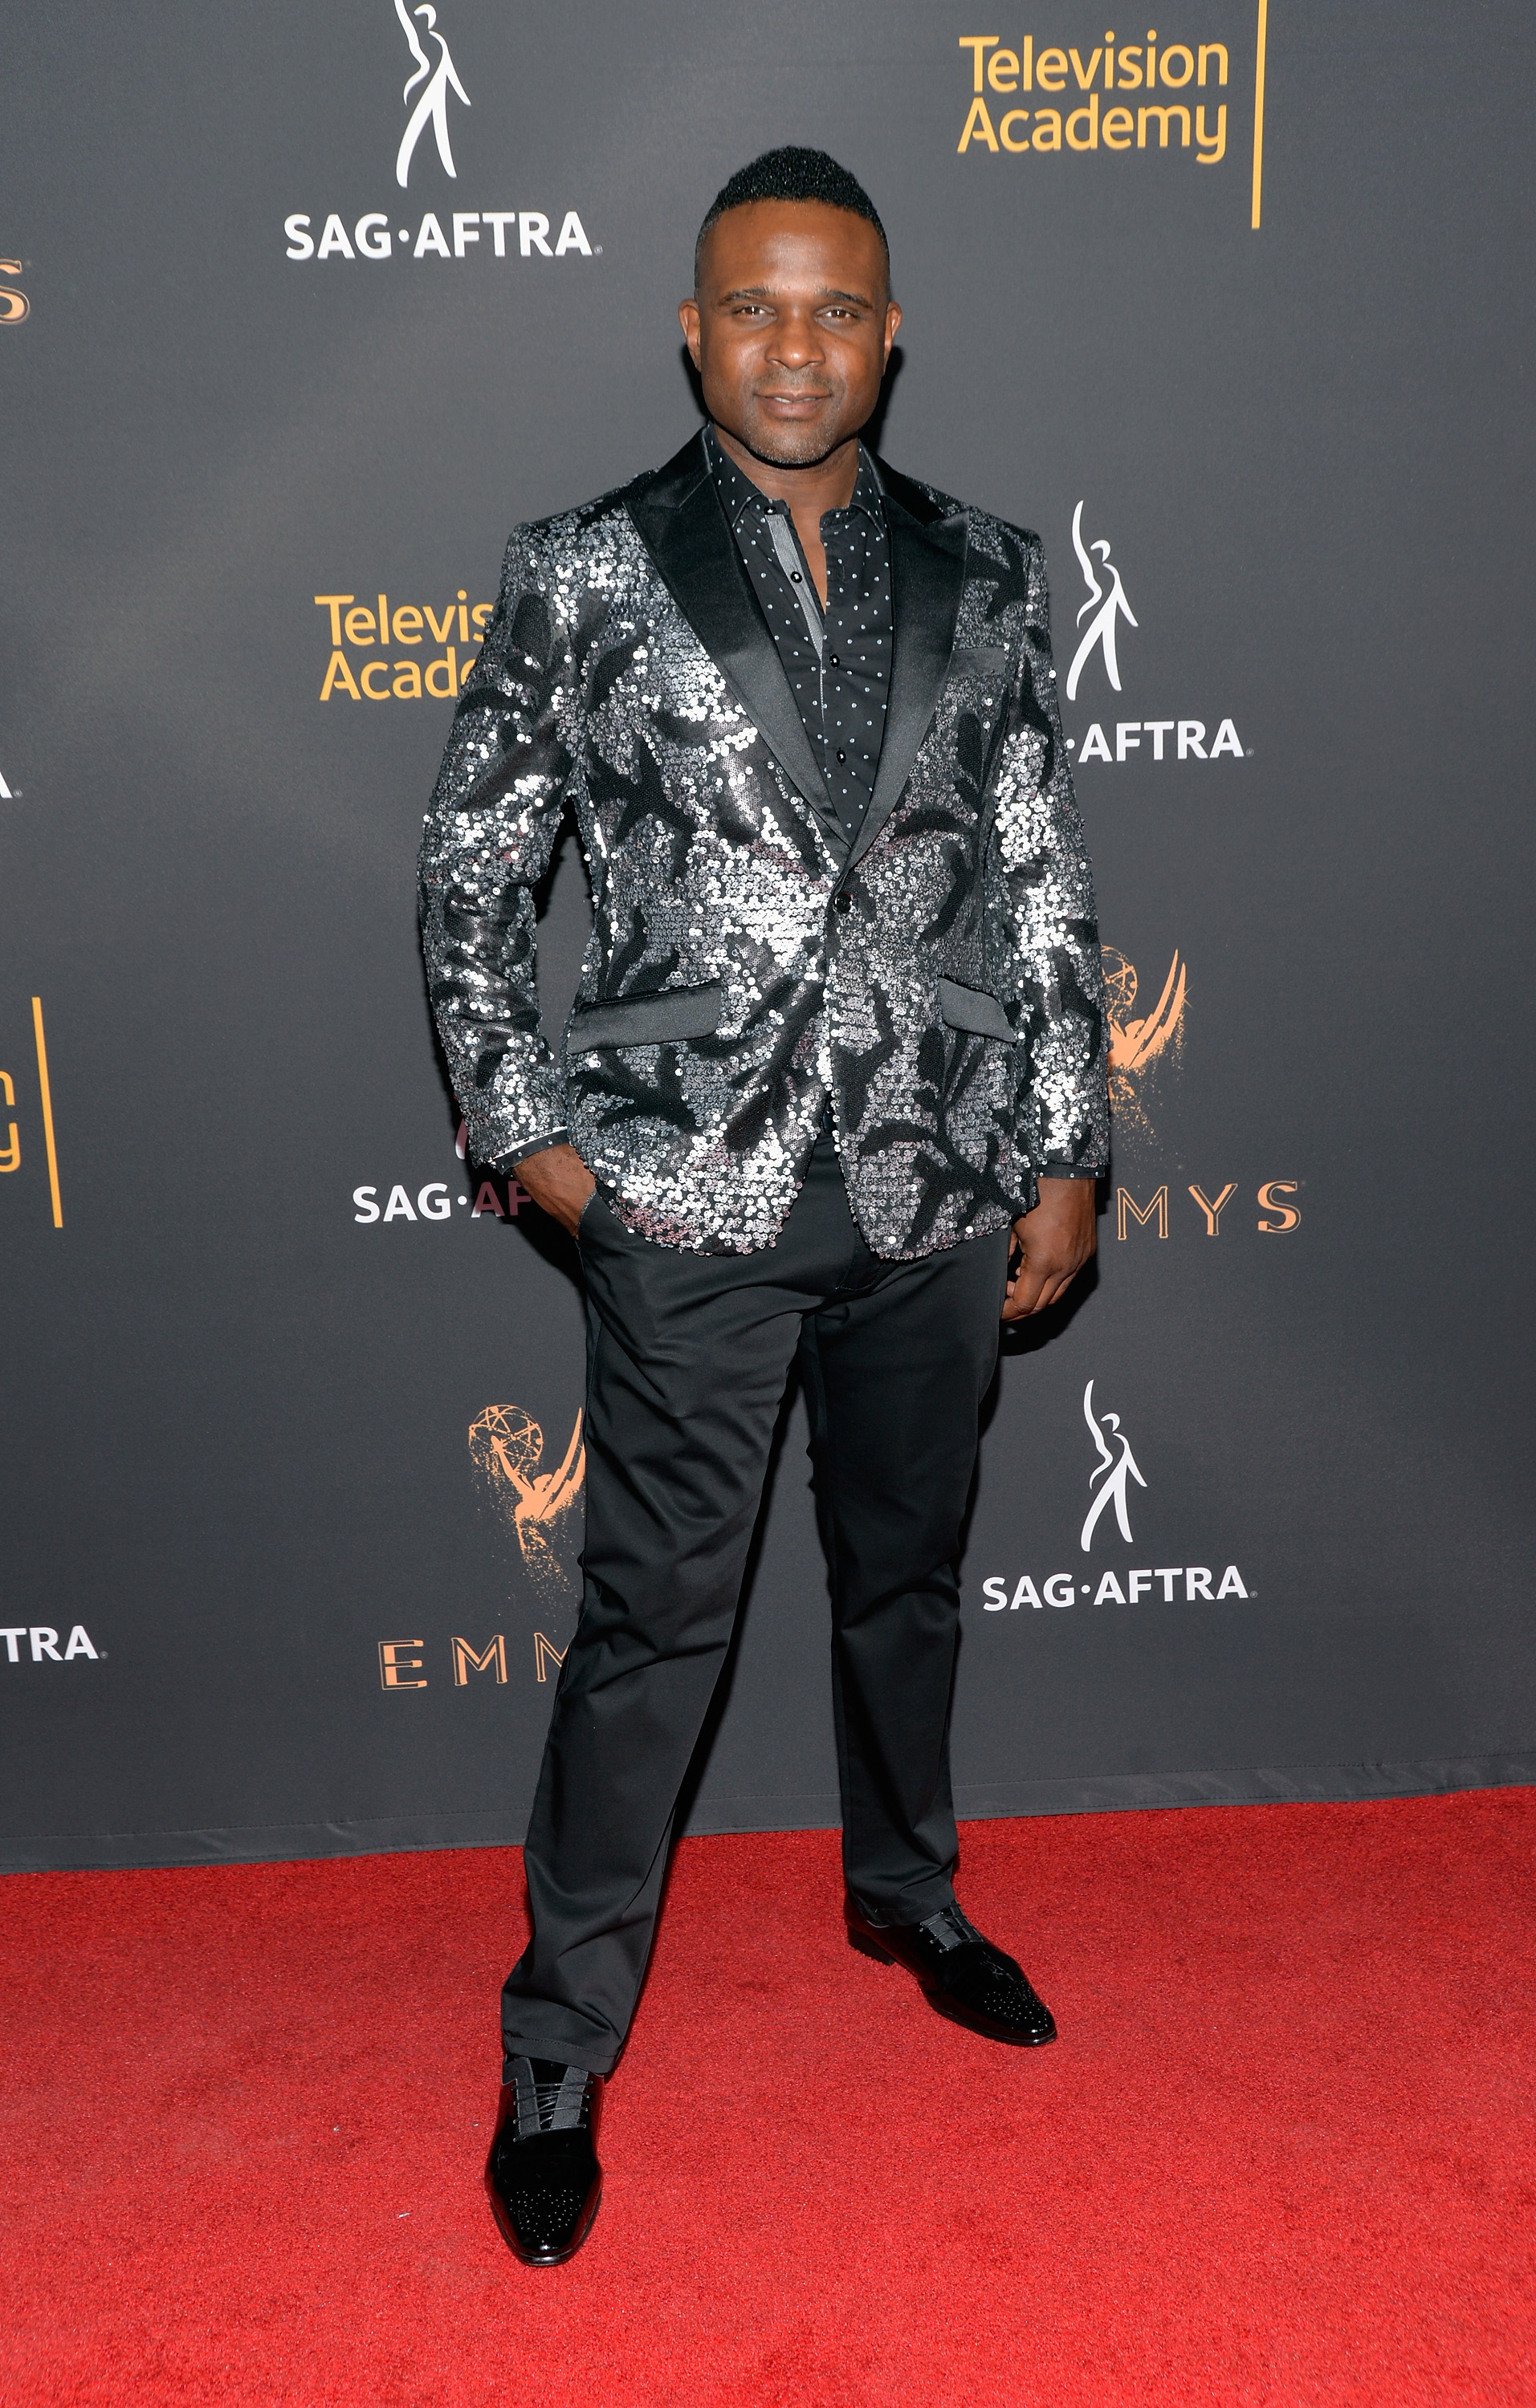 Darius McCrary attends the Television Academy and SAG-AFTRA's 5th annual Dynamic and Diverse Celebration at Saban Media Center on September 12, 2017 in North Hollywood, California. | Source: Getty Images